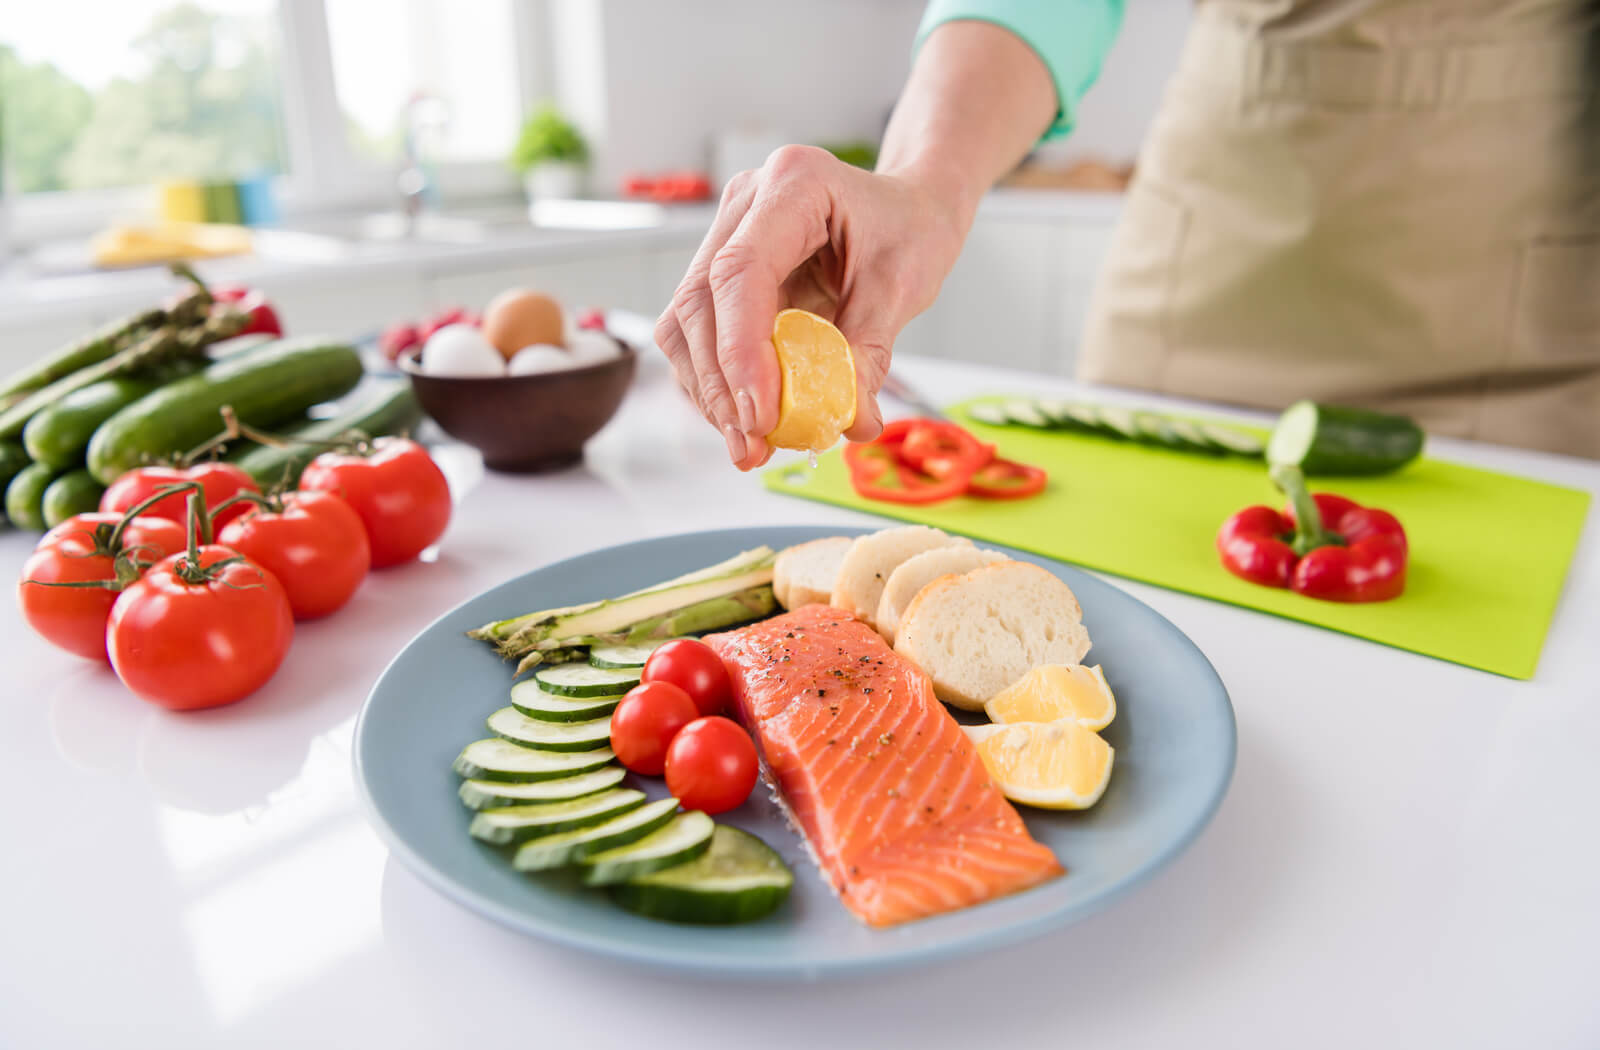 a person standing out of frame squeezes half of a lemon over a plat of salmon, zucchini, asparagus, tomatoes and slices of bread